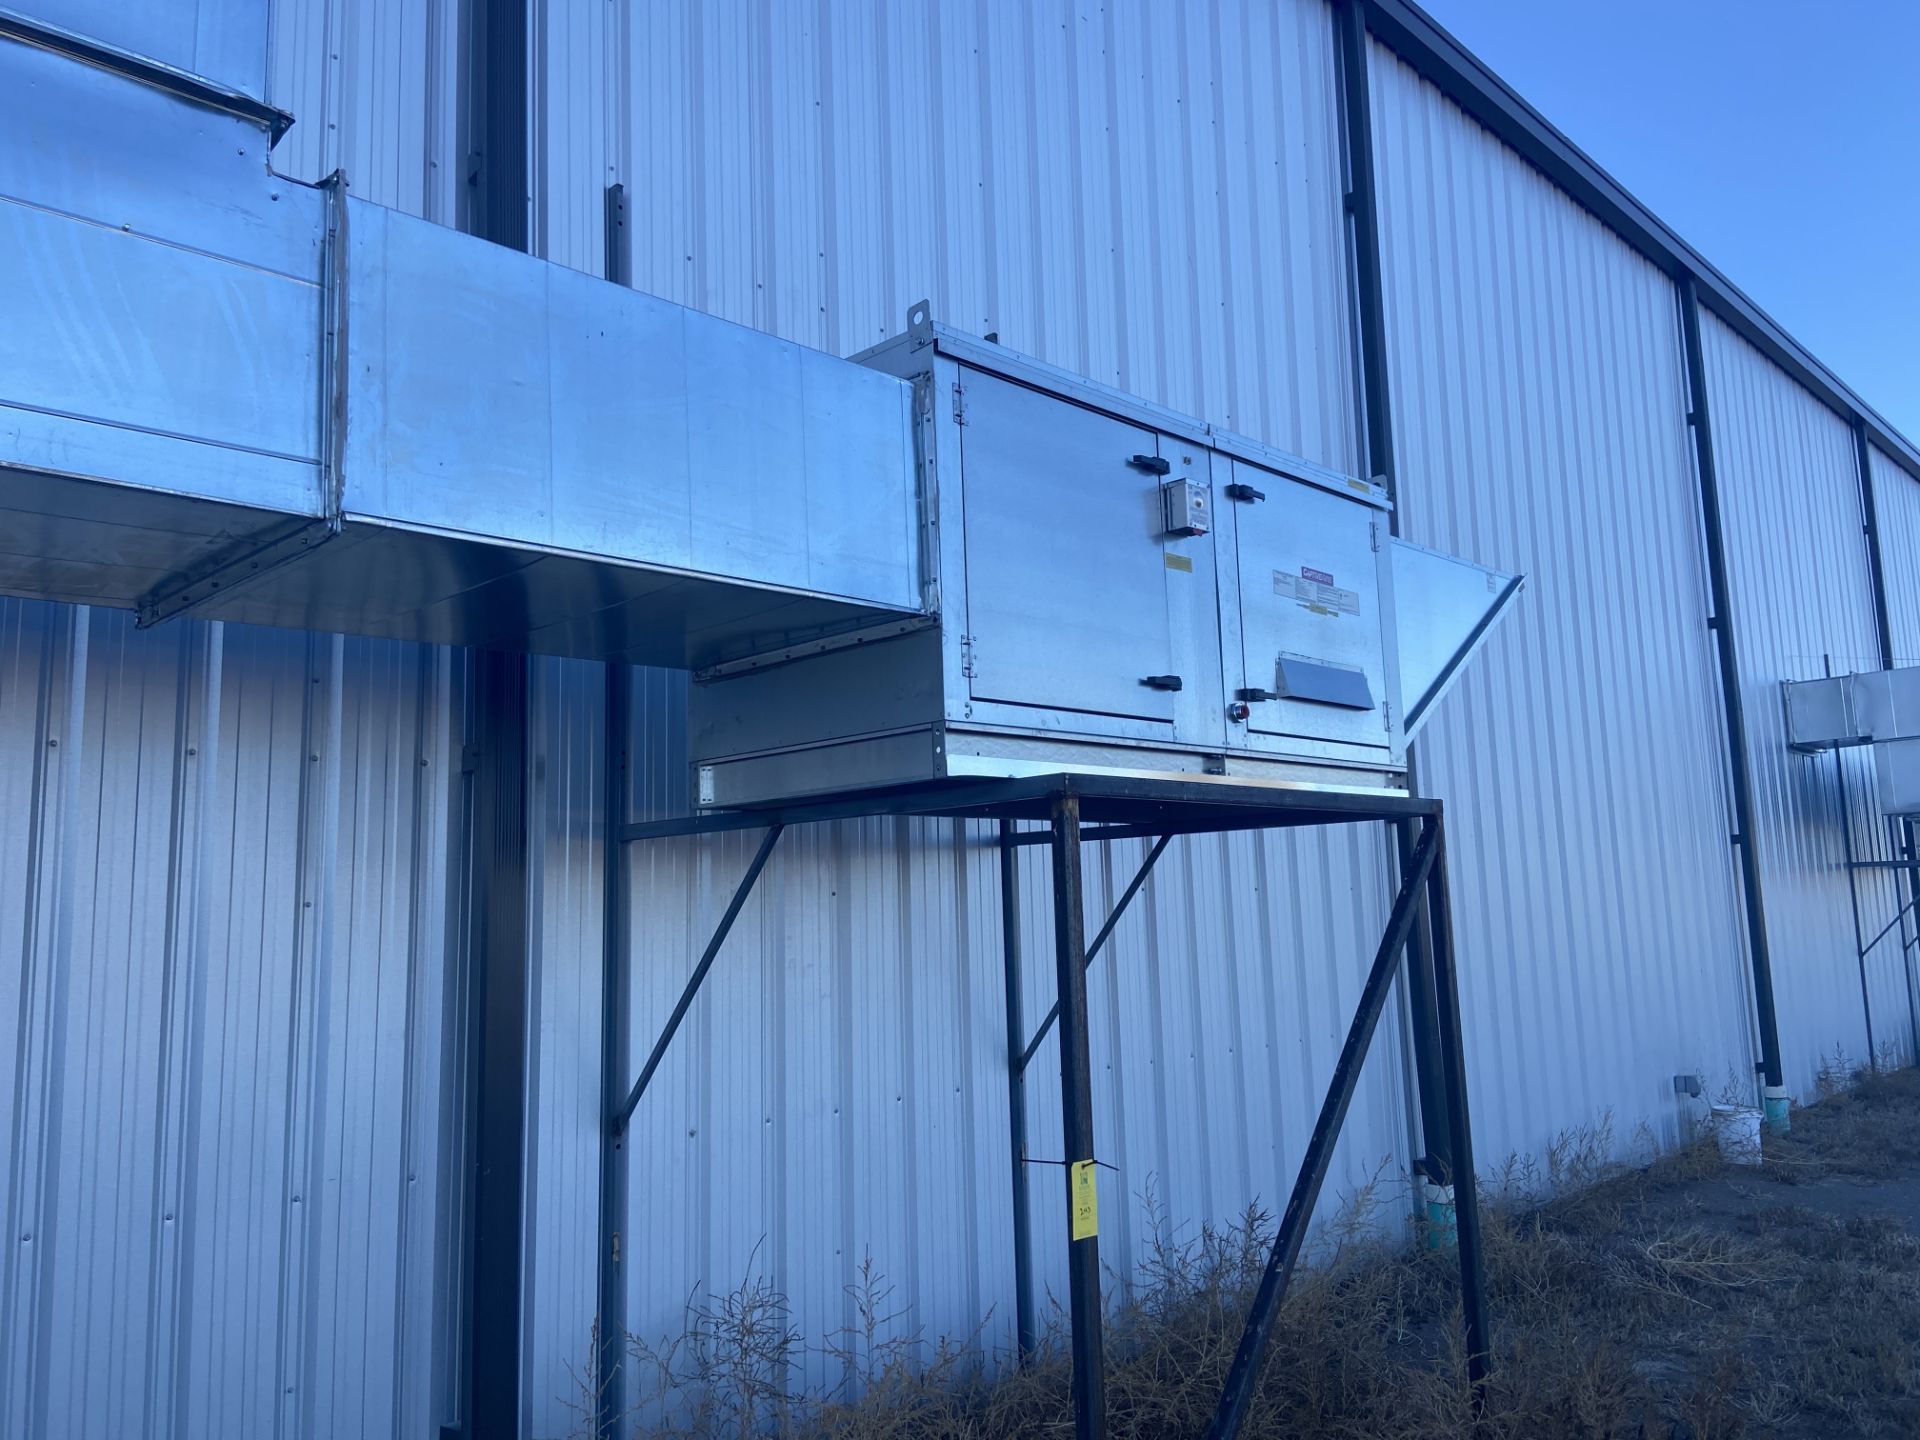 CaptiveAire Direct Industrial Air Heater, Model# A3-D.750-G18, Year 2019, Rigging Fee: $450